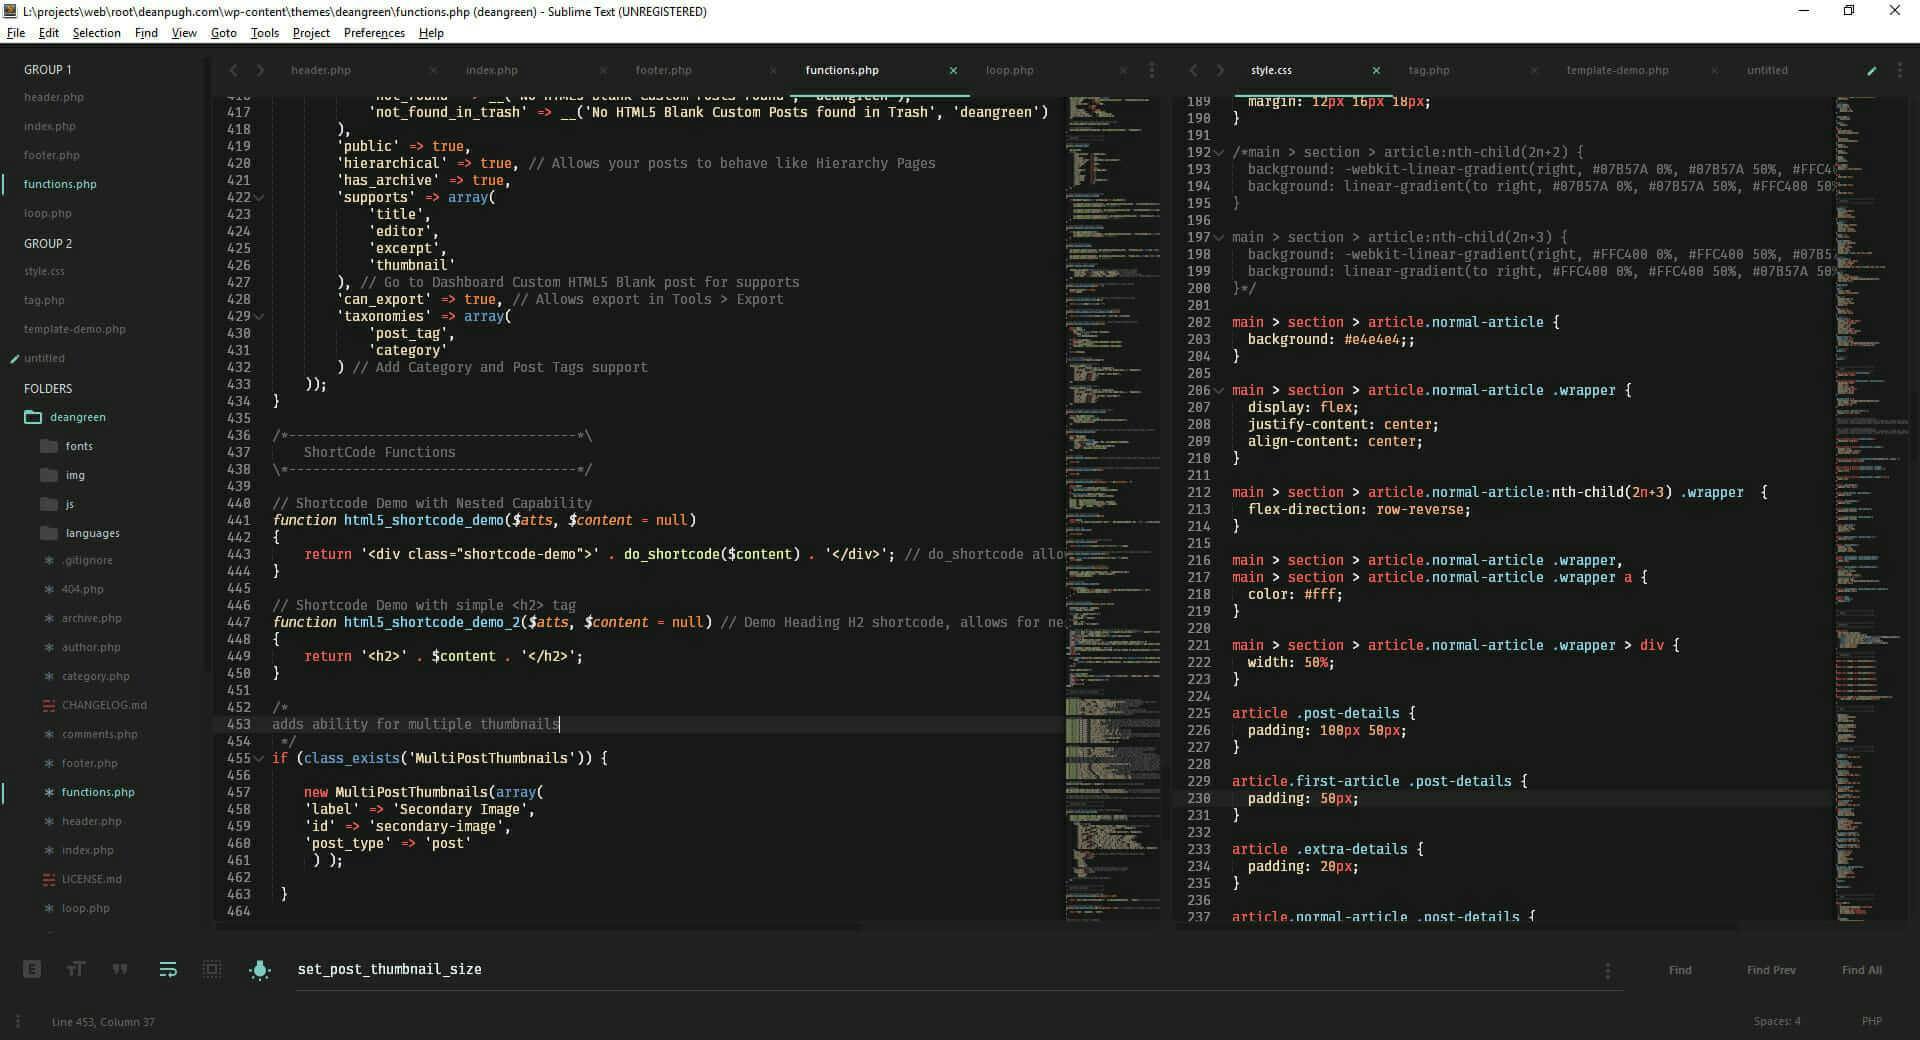 A screenshot of an old code editor with some CSS